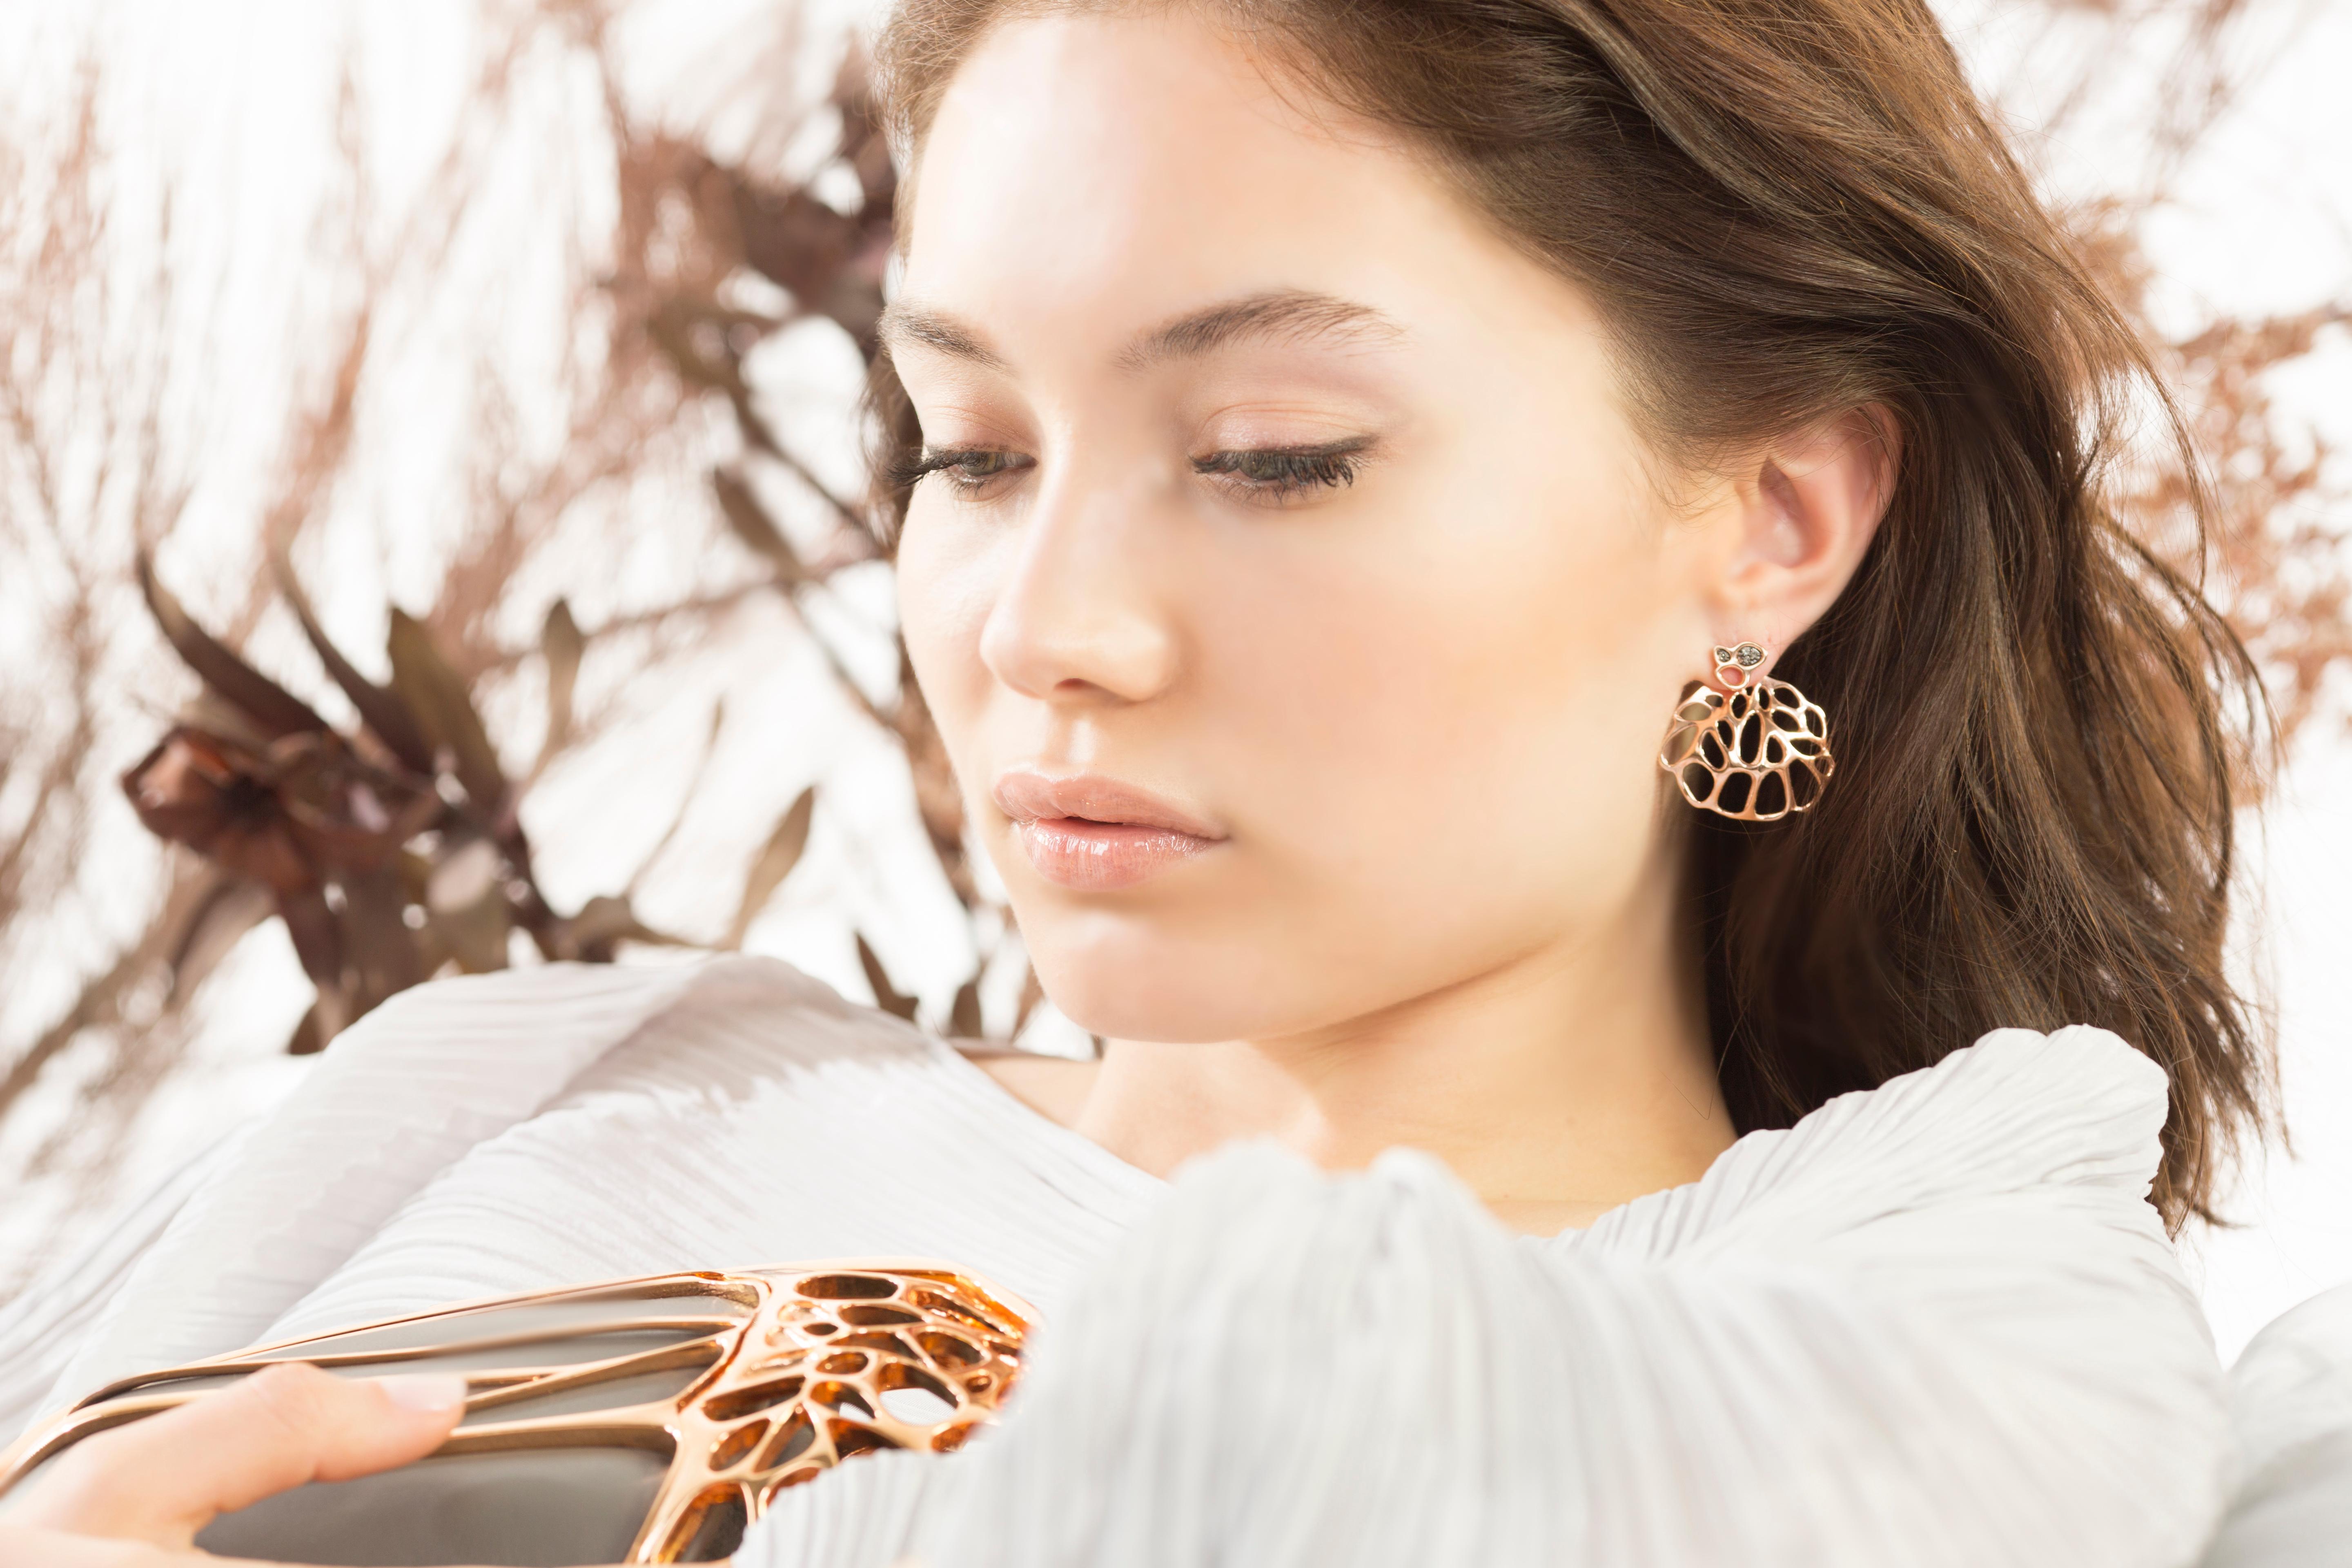 The AODA Studs and Ear Jacket Earrings are intended to recall fossils or futuristic organisms. The intricate geometry radiates a 3 dimensional suspended sculpture when worn.
These visionary pieces, part objet d'art, part artifacts are digitally